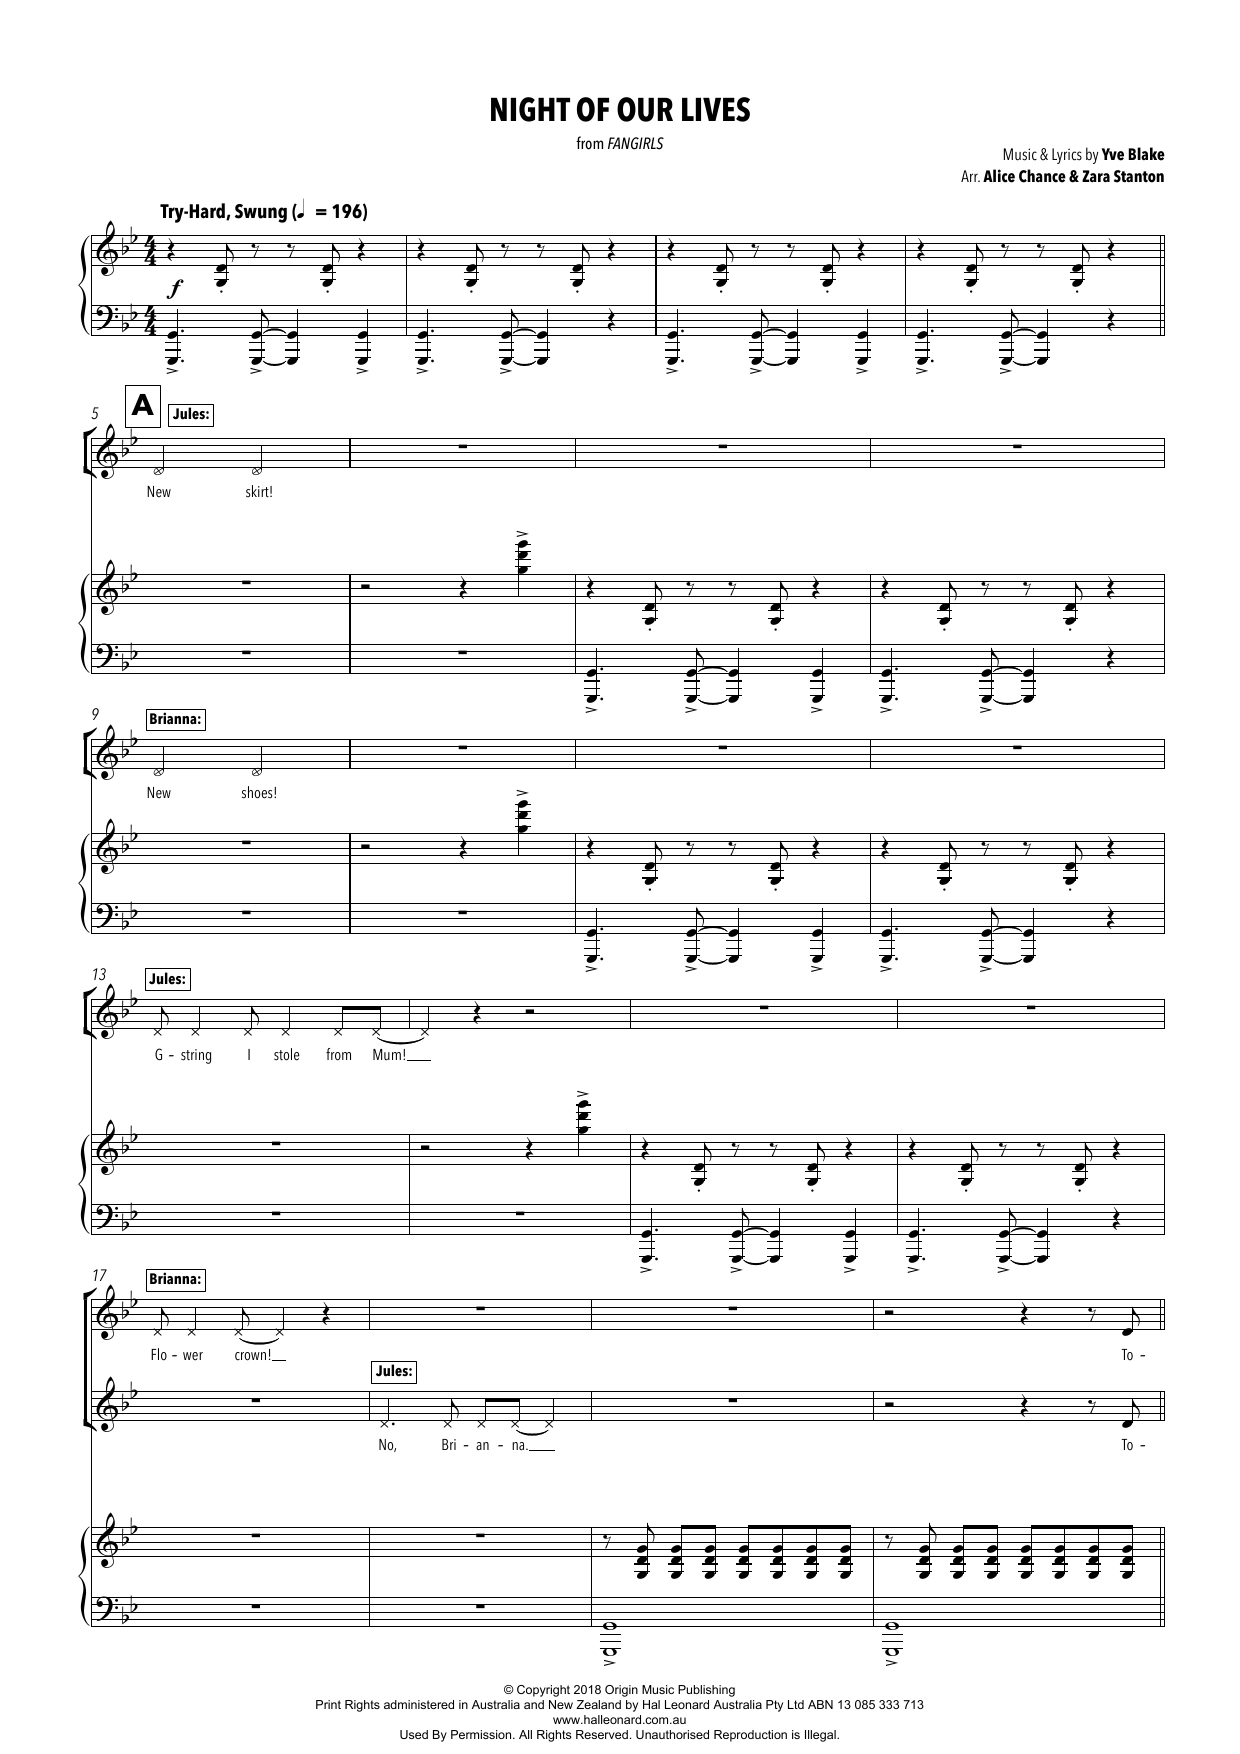 Download Yve Blake Night Of Our Lives (from Fangirls) (arr Sheet Music